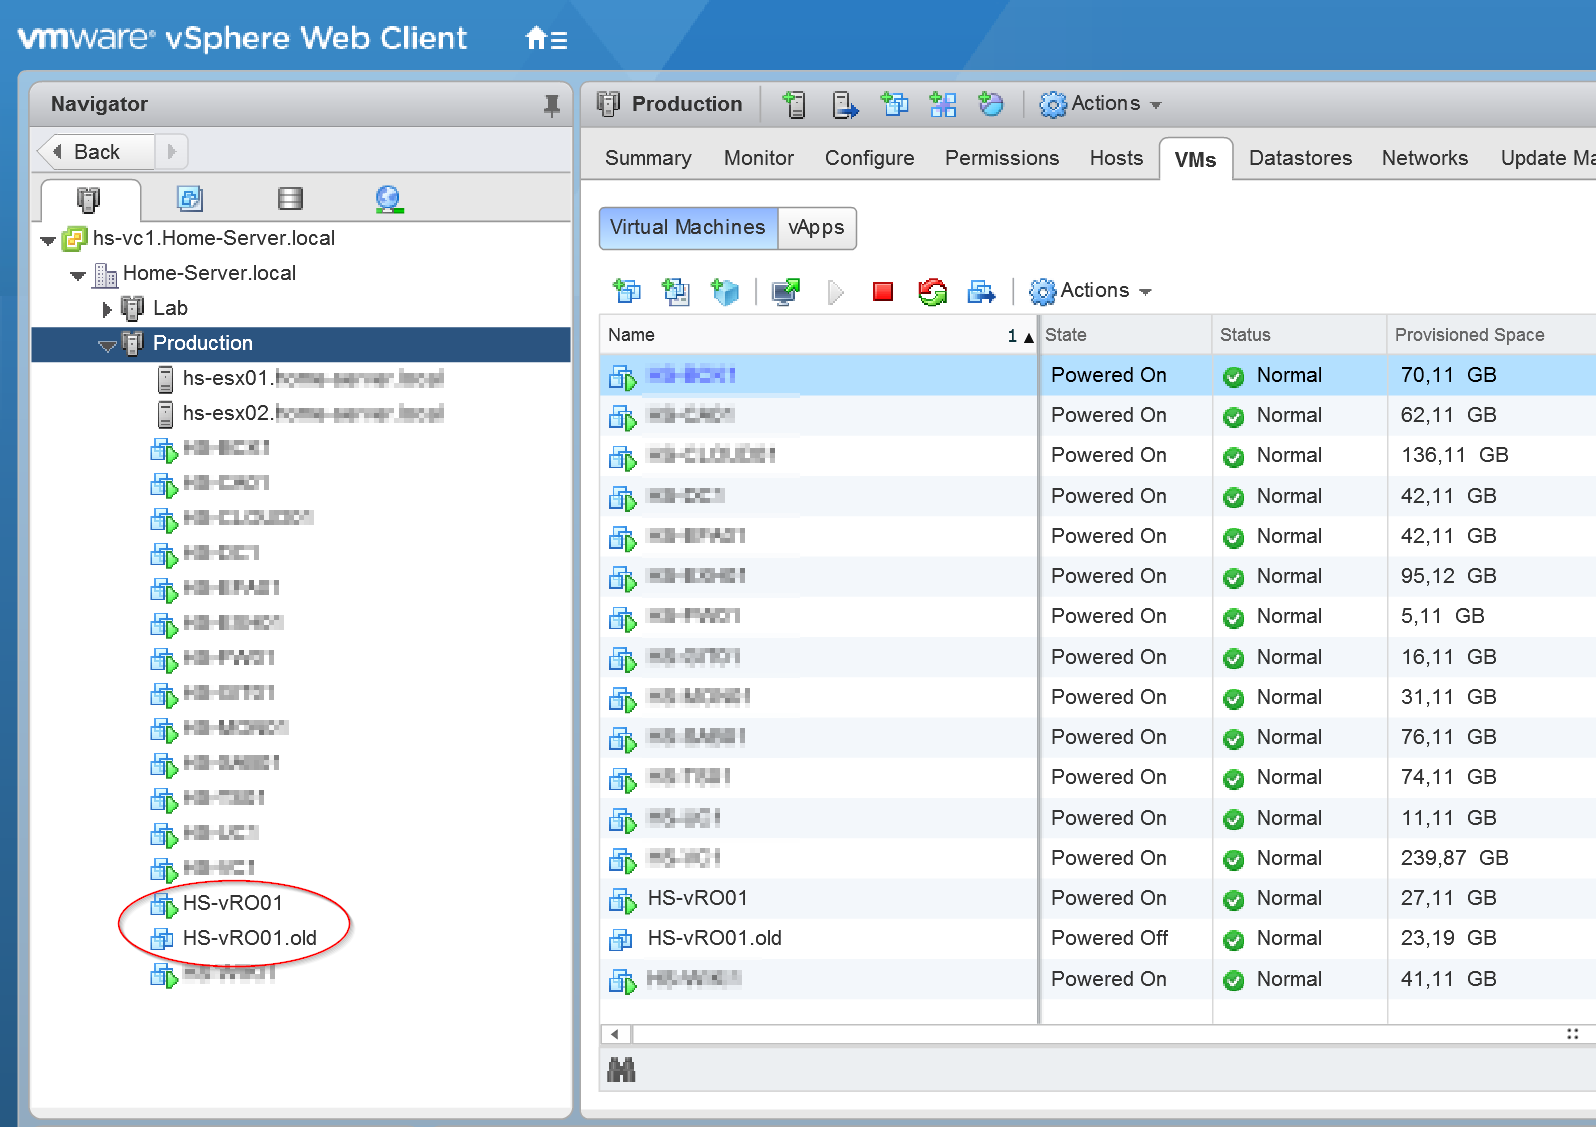 vRealize Orchestrator 7.5 - Old and New